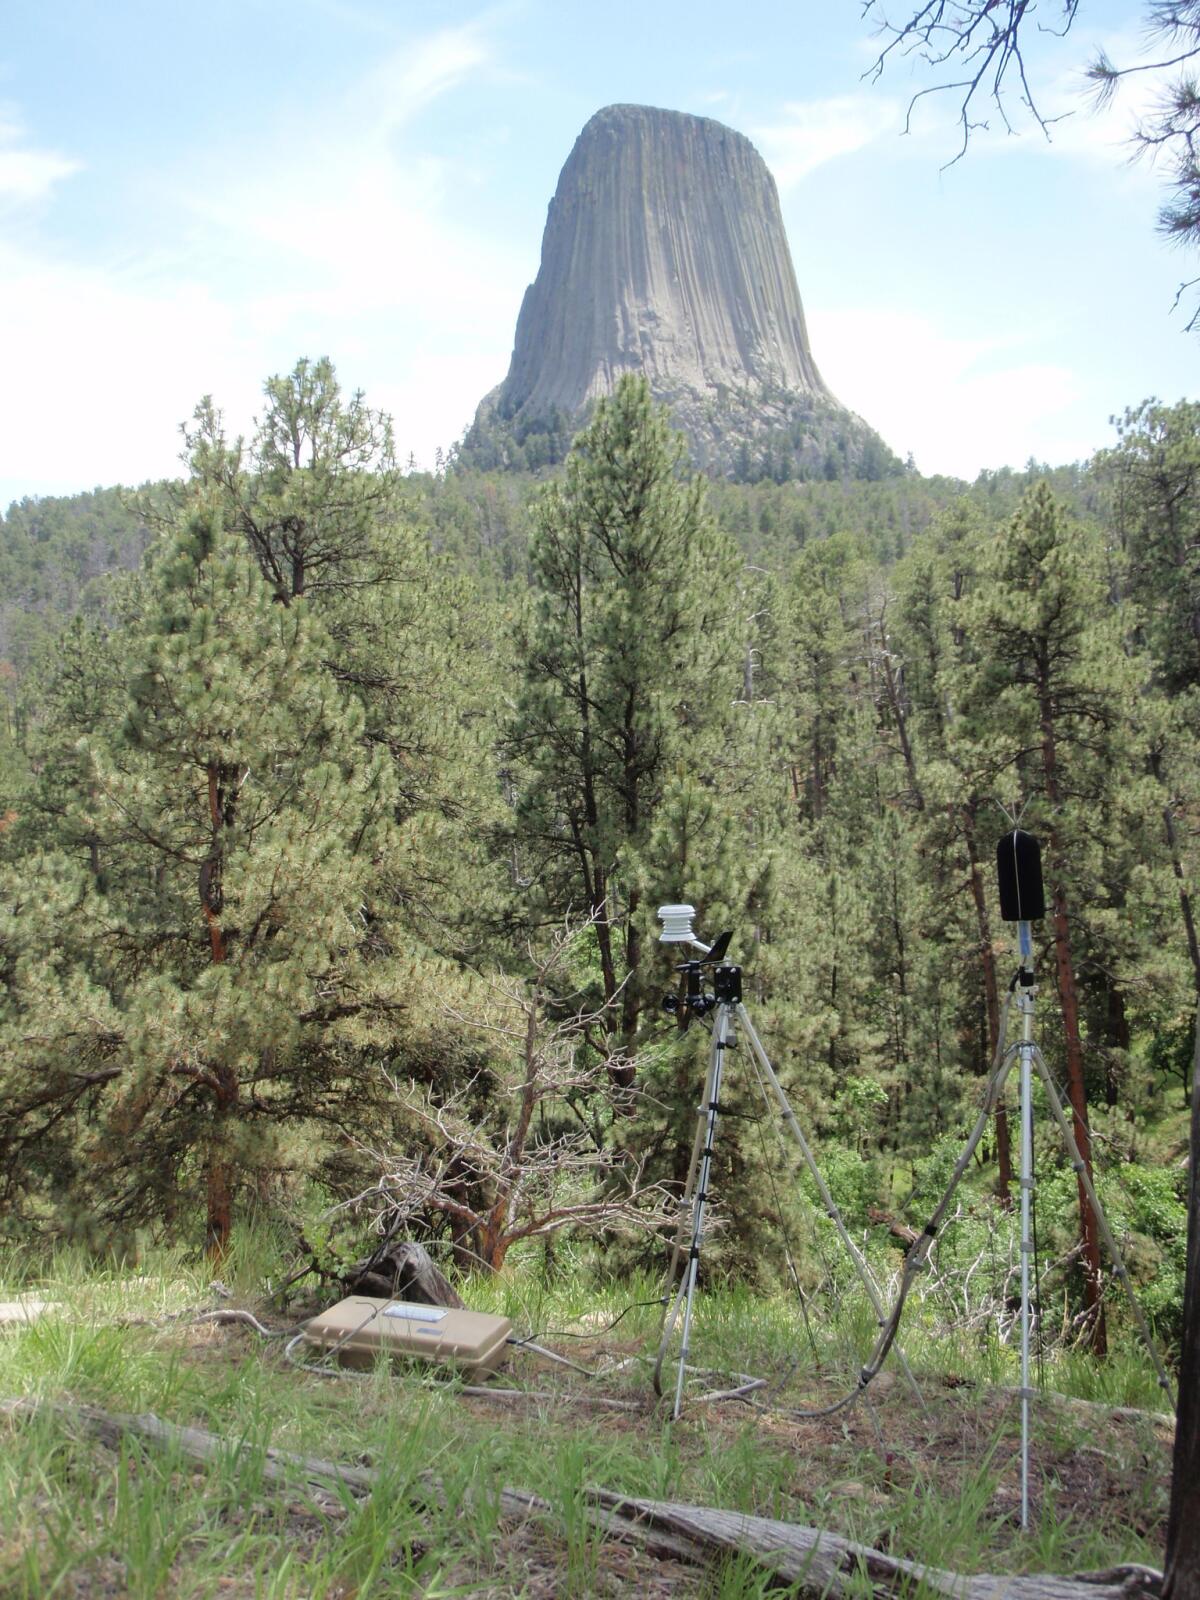 An acoustic recording station captures sound levels in Devils Tower National Monument in Wyoming.